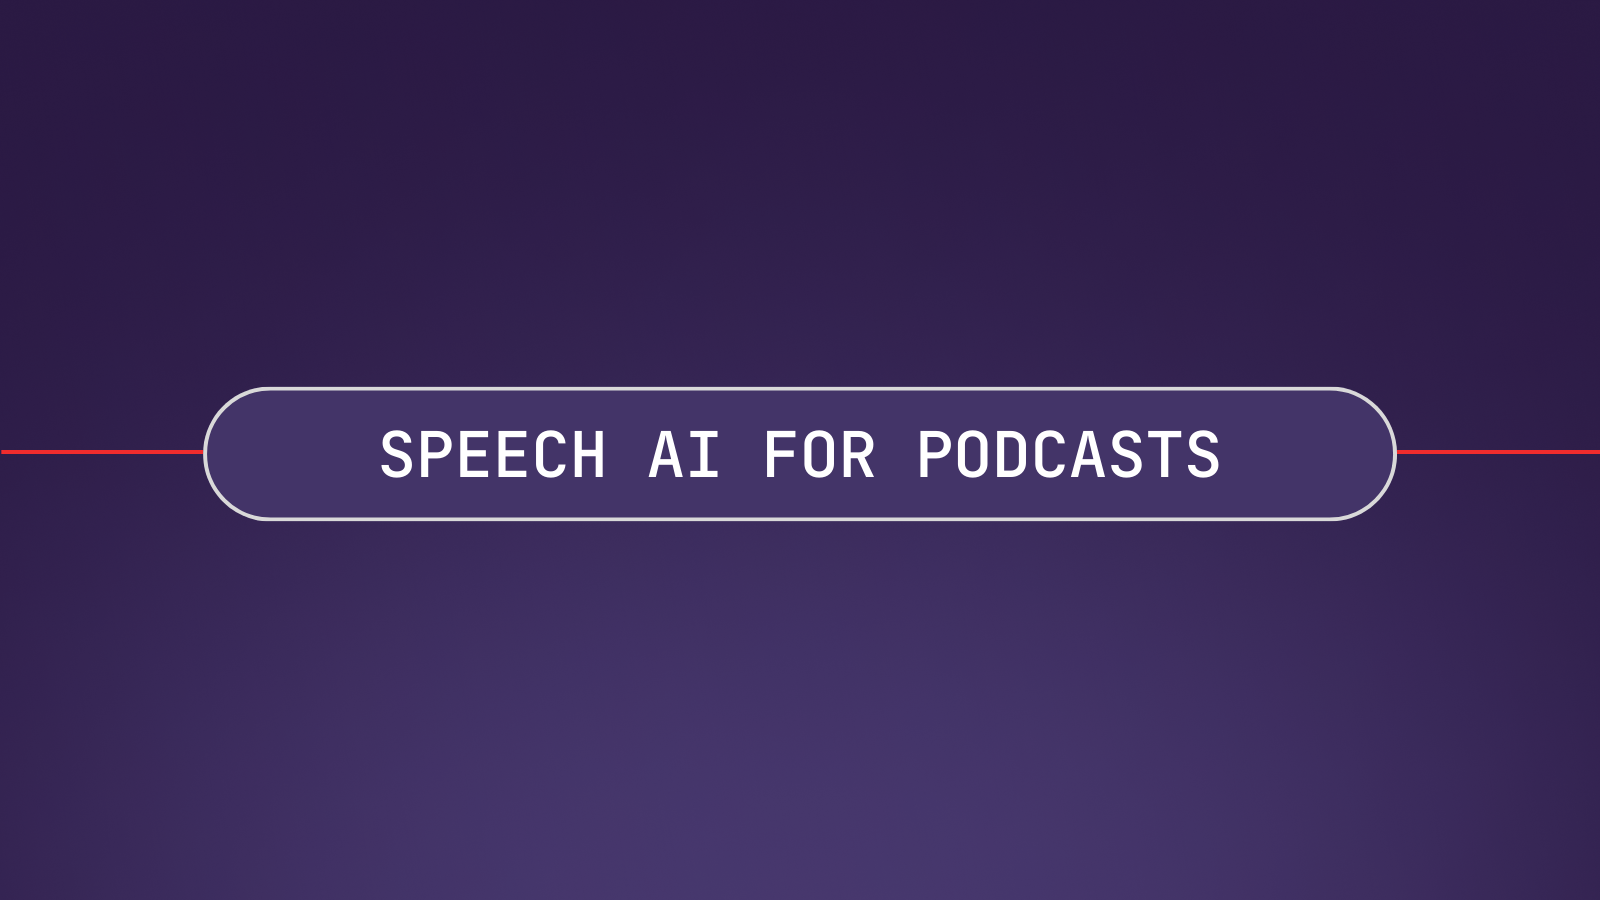 How to use Speech AI systems for podcast hosting, editing, and monetization